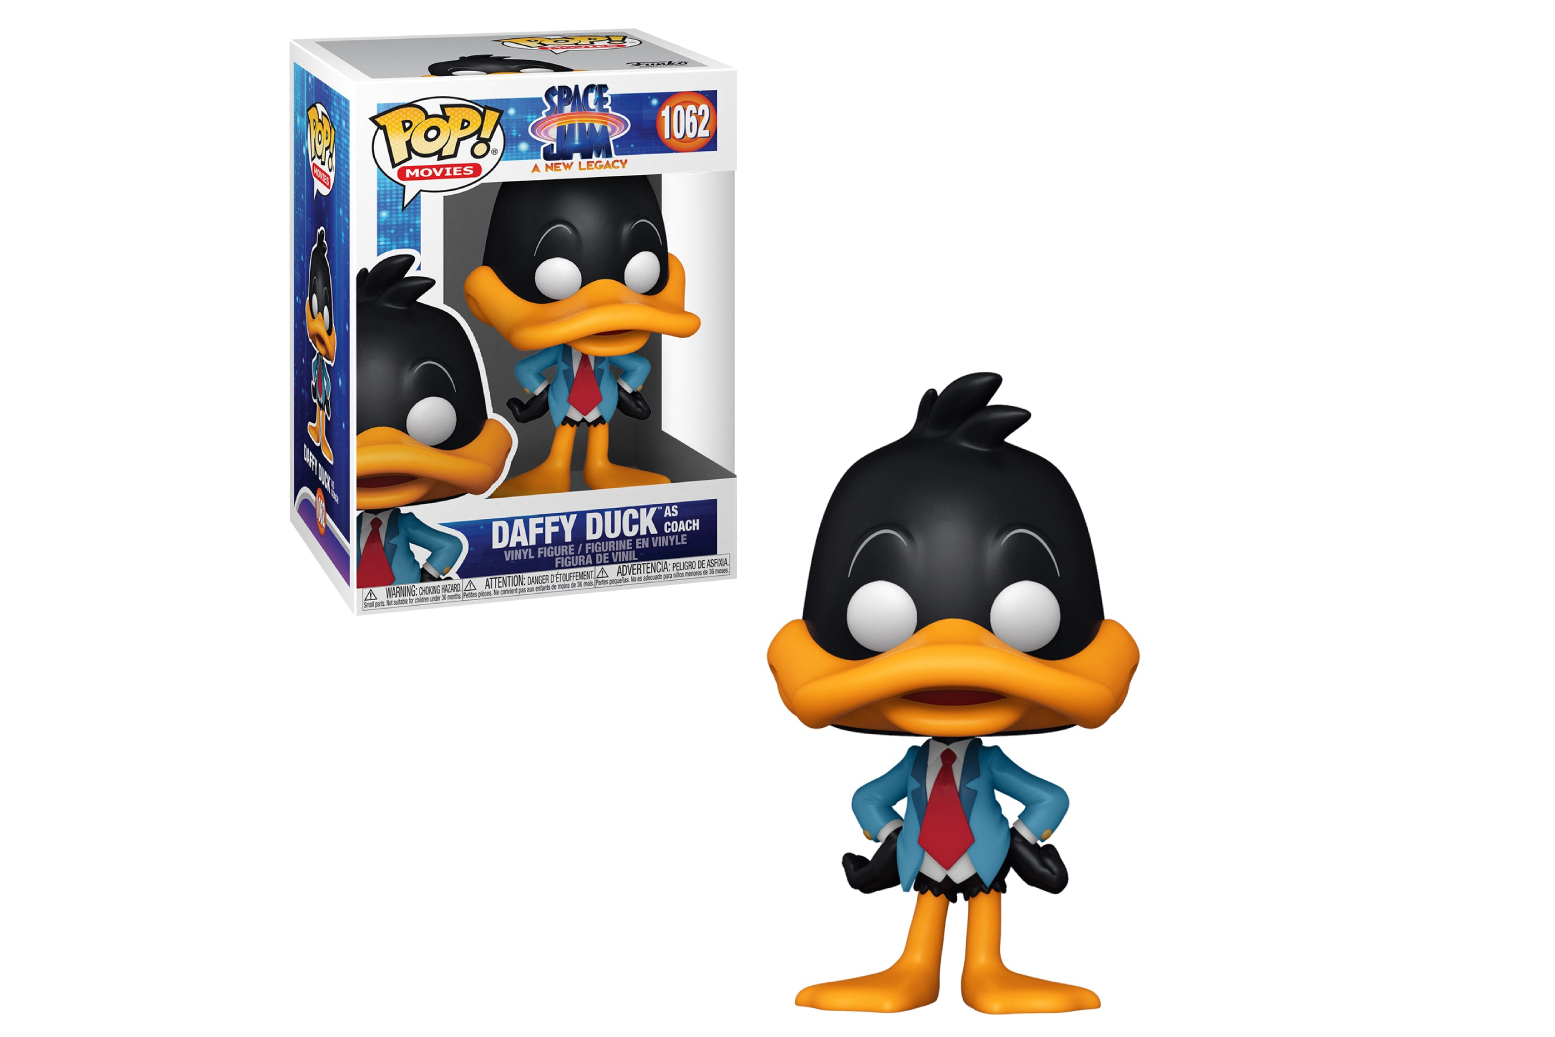 Funko POP! Movies Space Jam A New Legacy Daffy Duck as Coach #1062